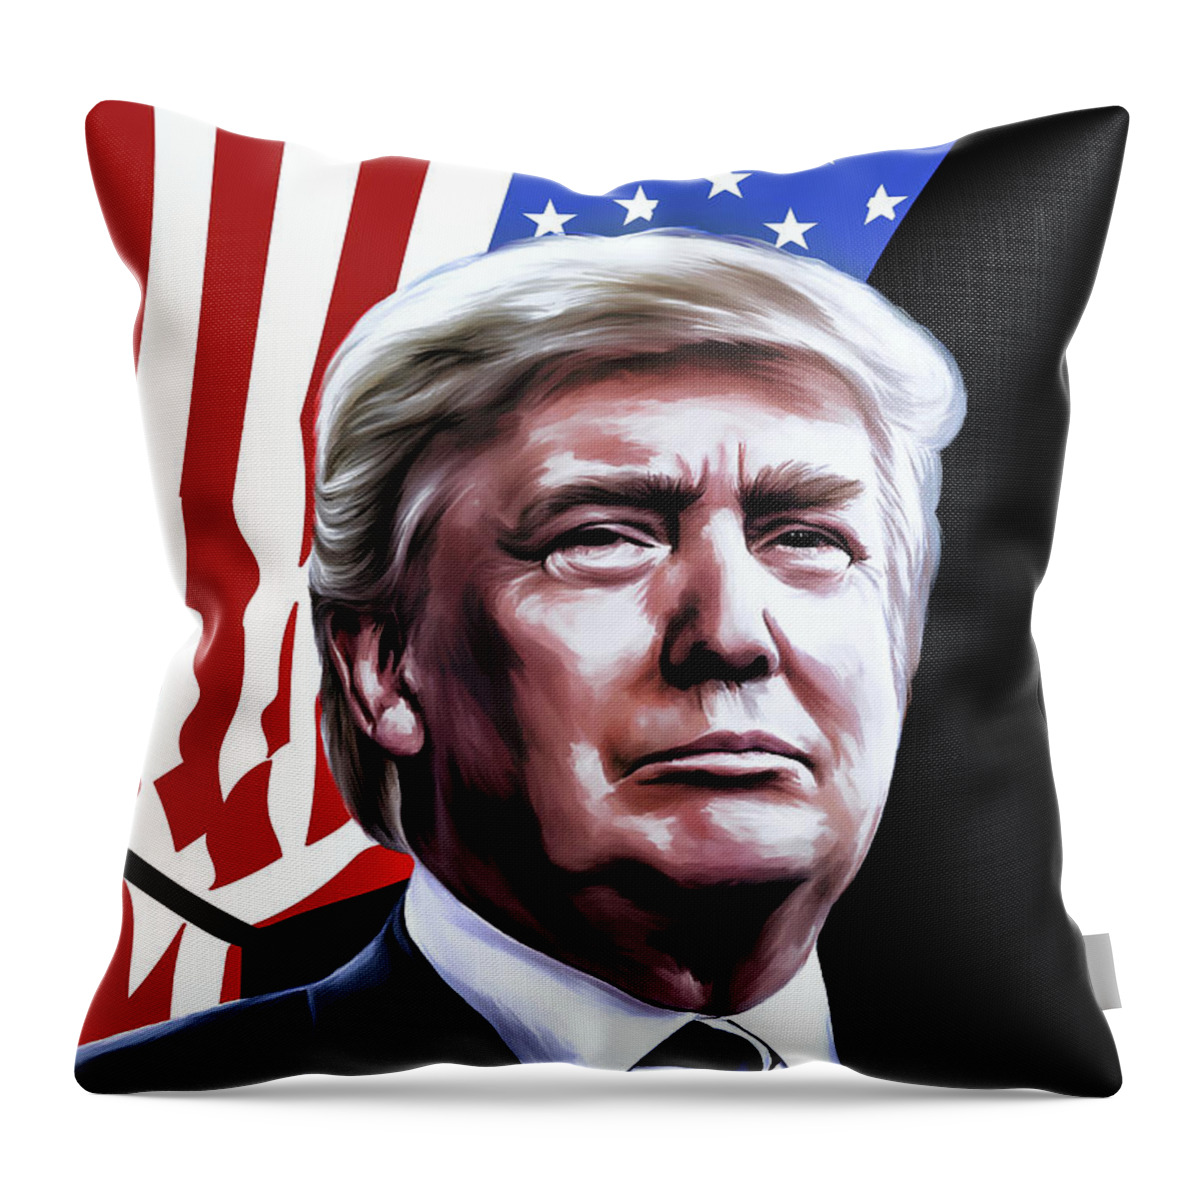 Donald Throw Pillow featuring the painting President by Andrzej Szczerski